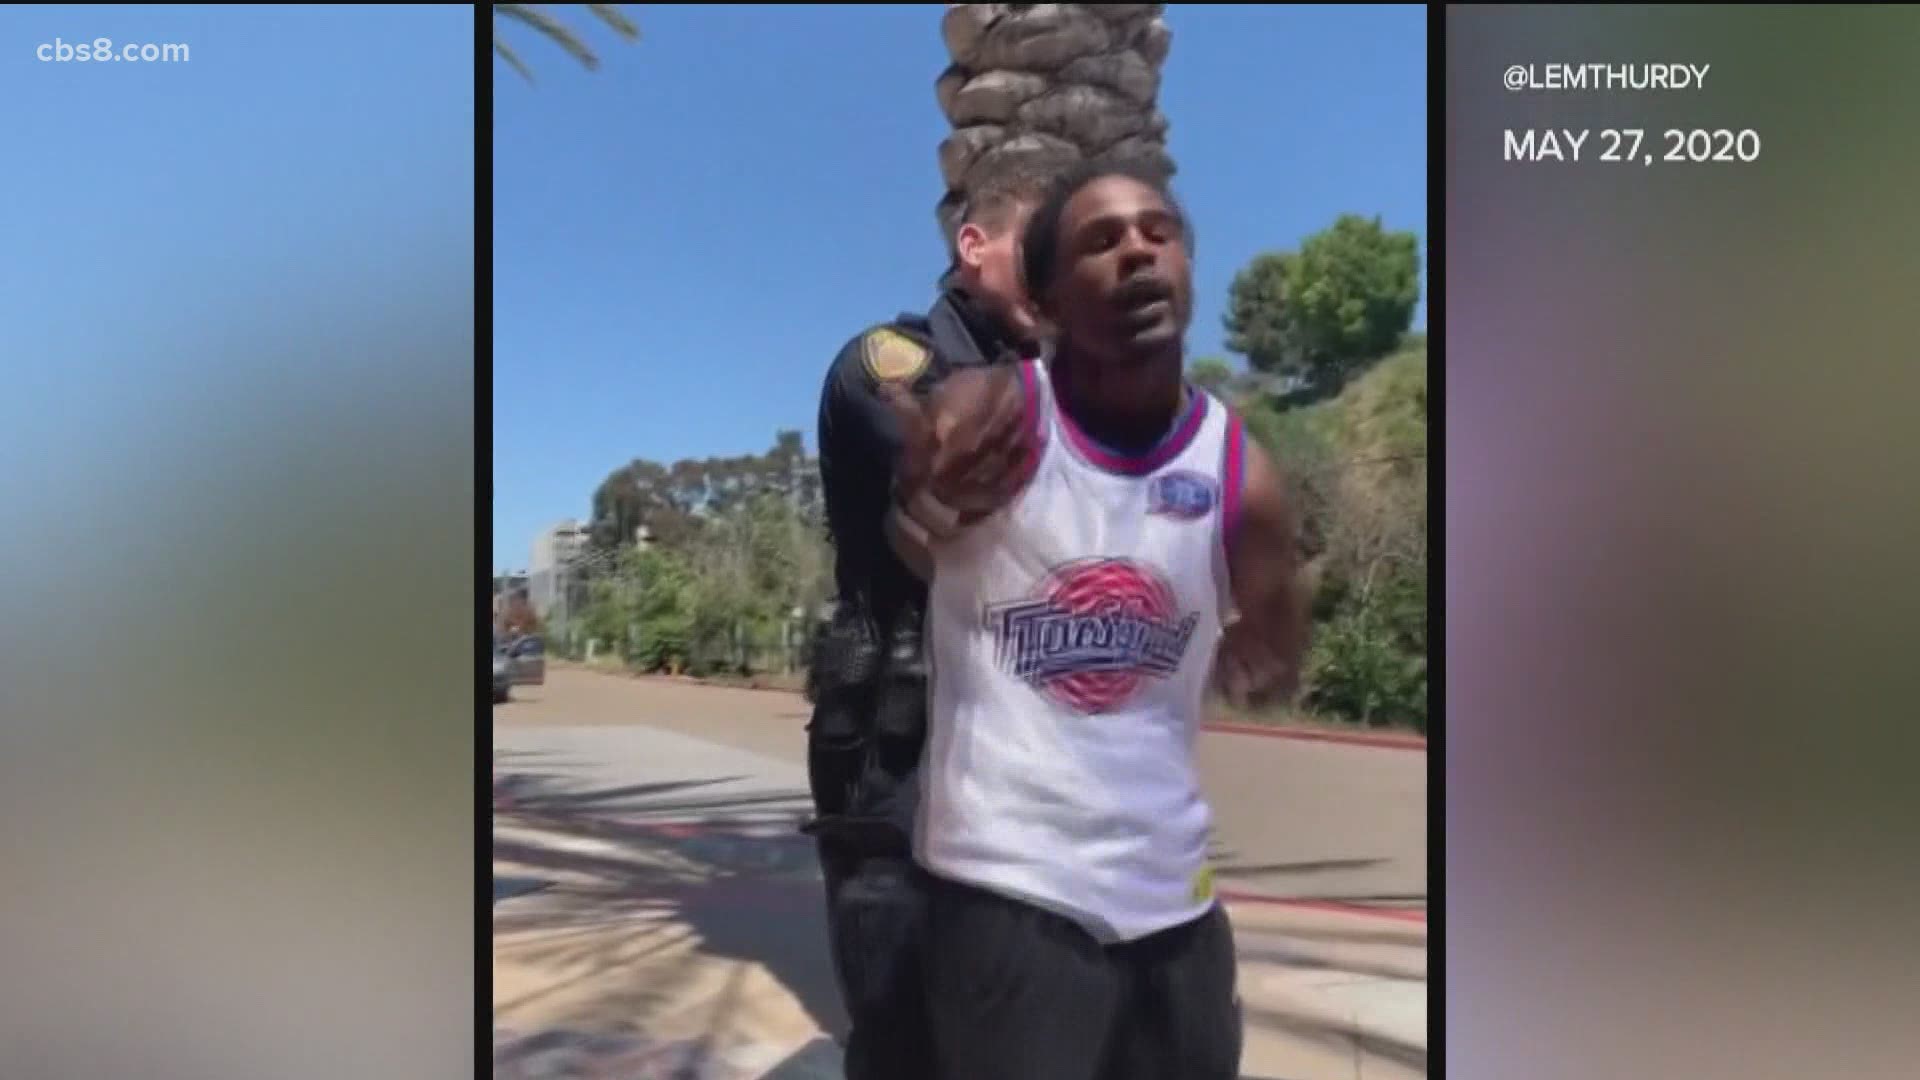 Video of the arrest showed Dages confronting 23-year-old Amaurie Johnson at the Grossmont Trolley Station as Johnson says he was simply waiting for a friend.